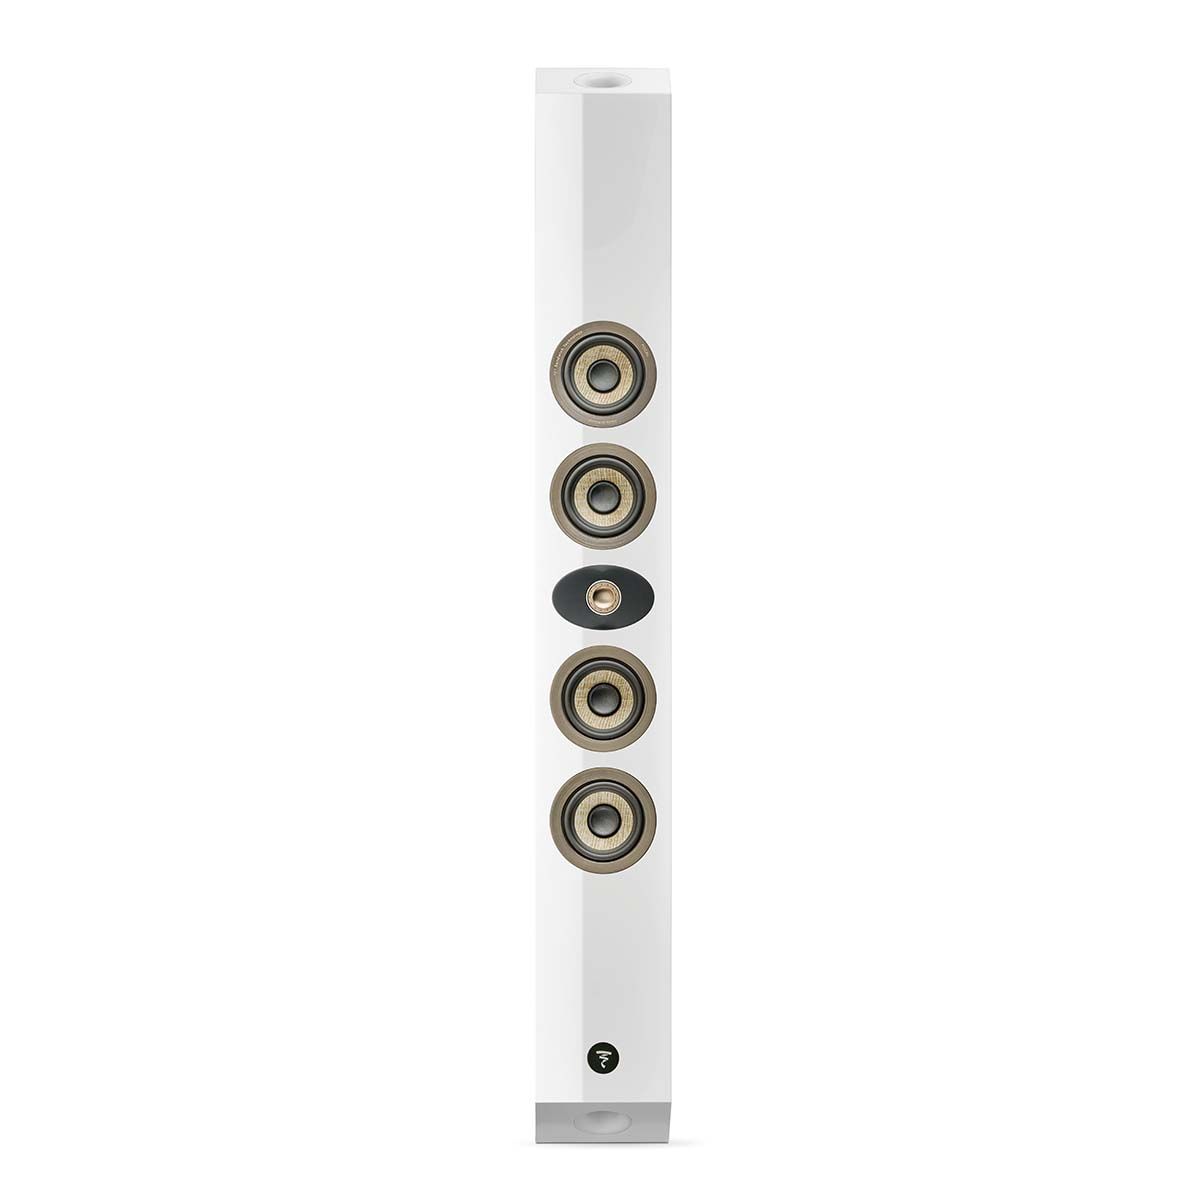 Focal On Wall 302 Speaker, Gloss White, vertical front view without grille